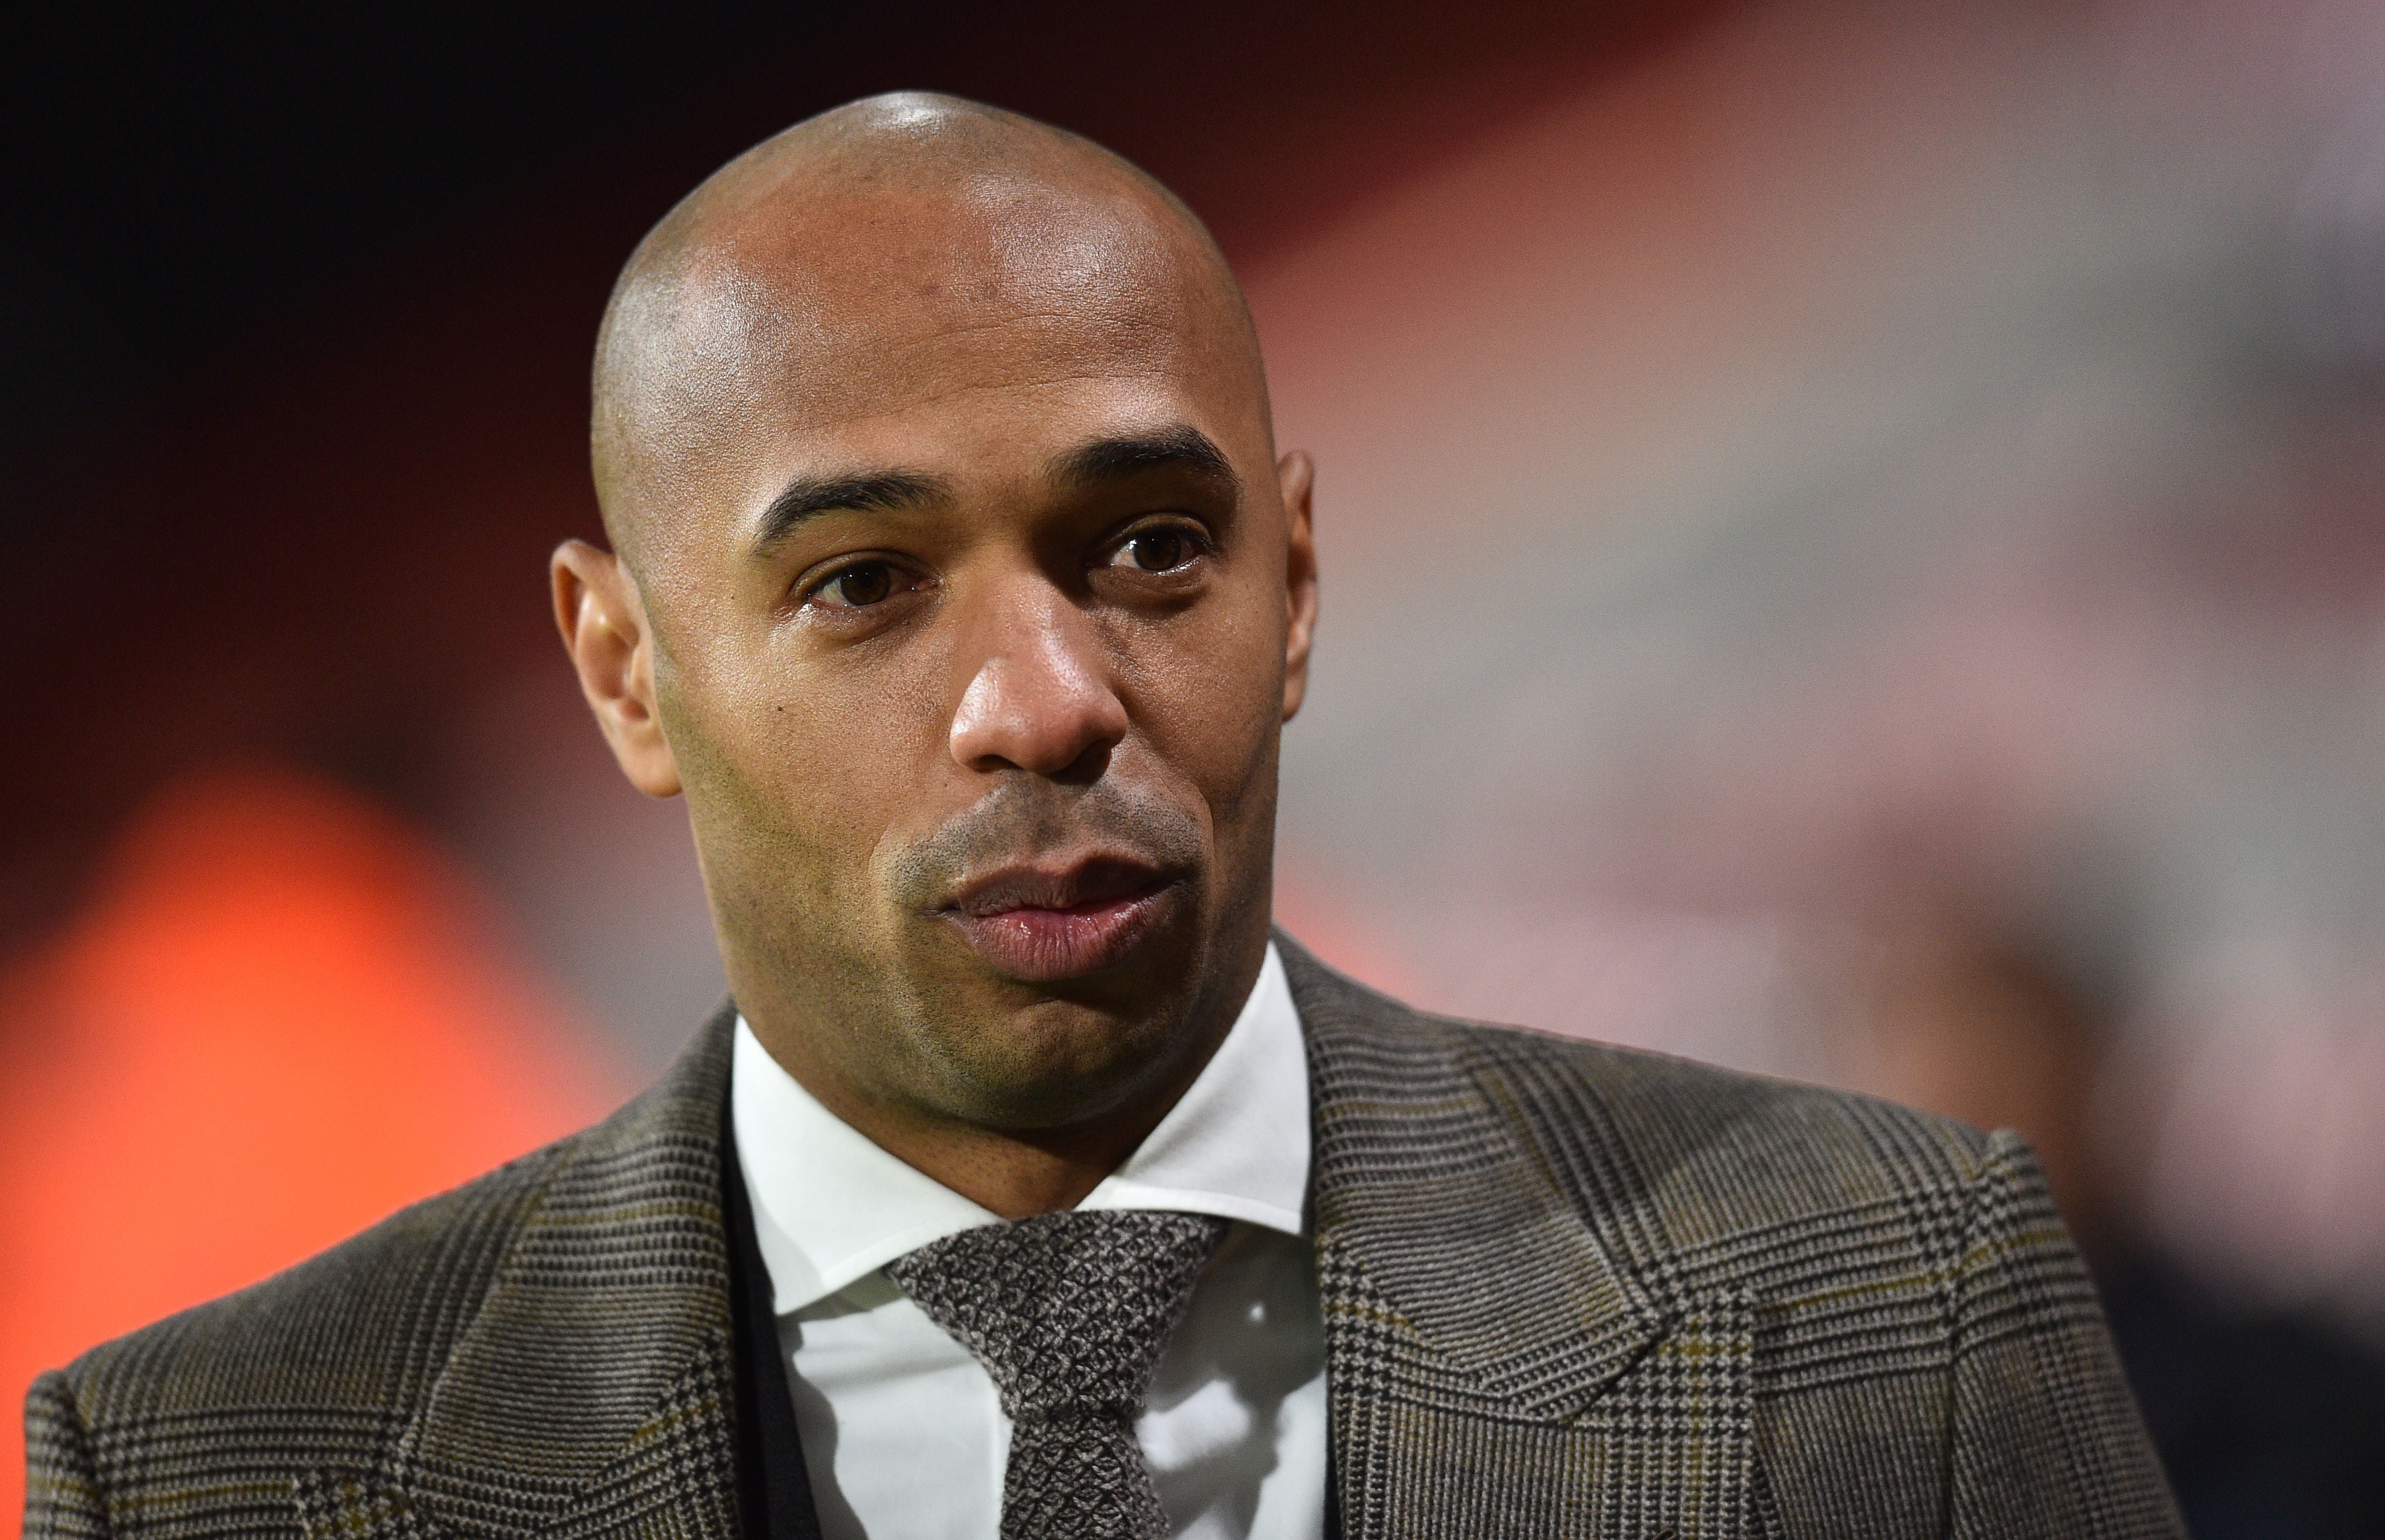 Thierry Henry is reportedly involved in the bid alongside Patrick Vieira and Dennis Bergkamp